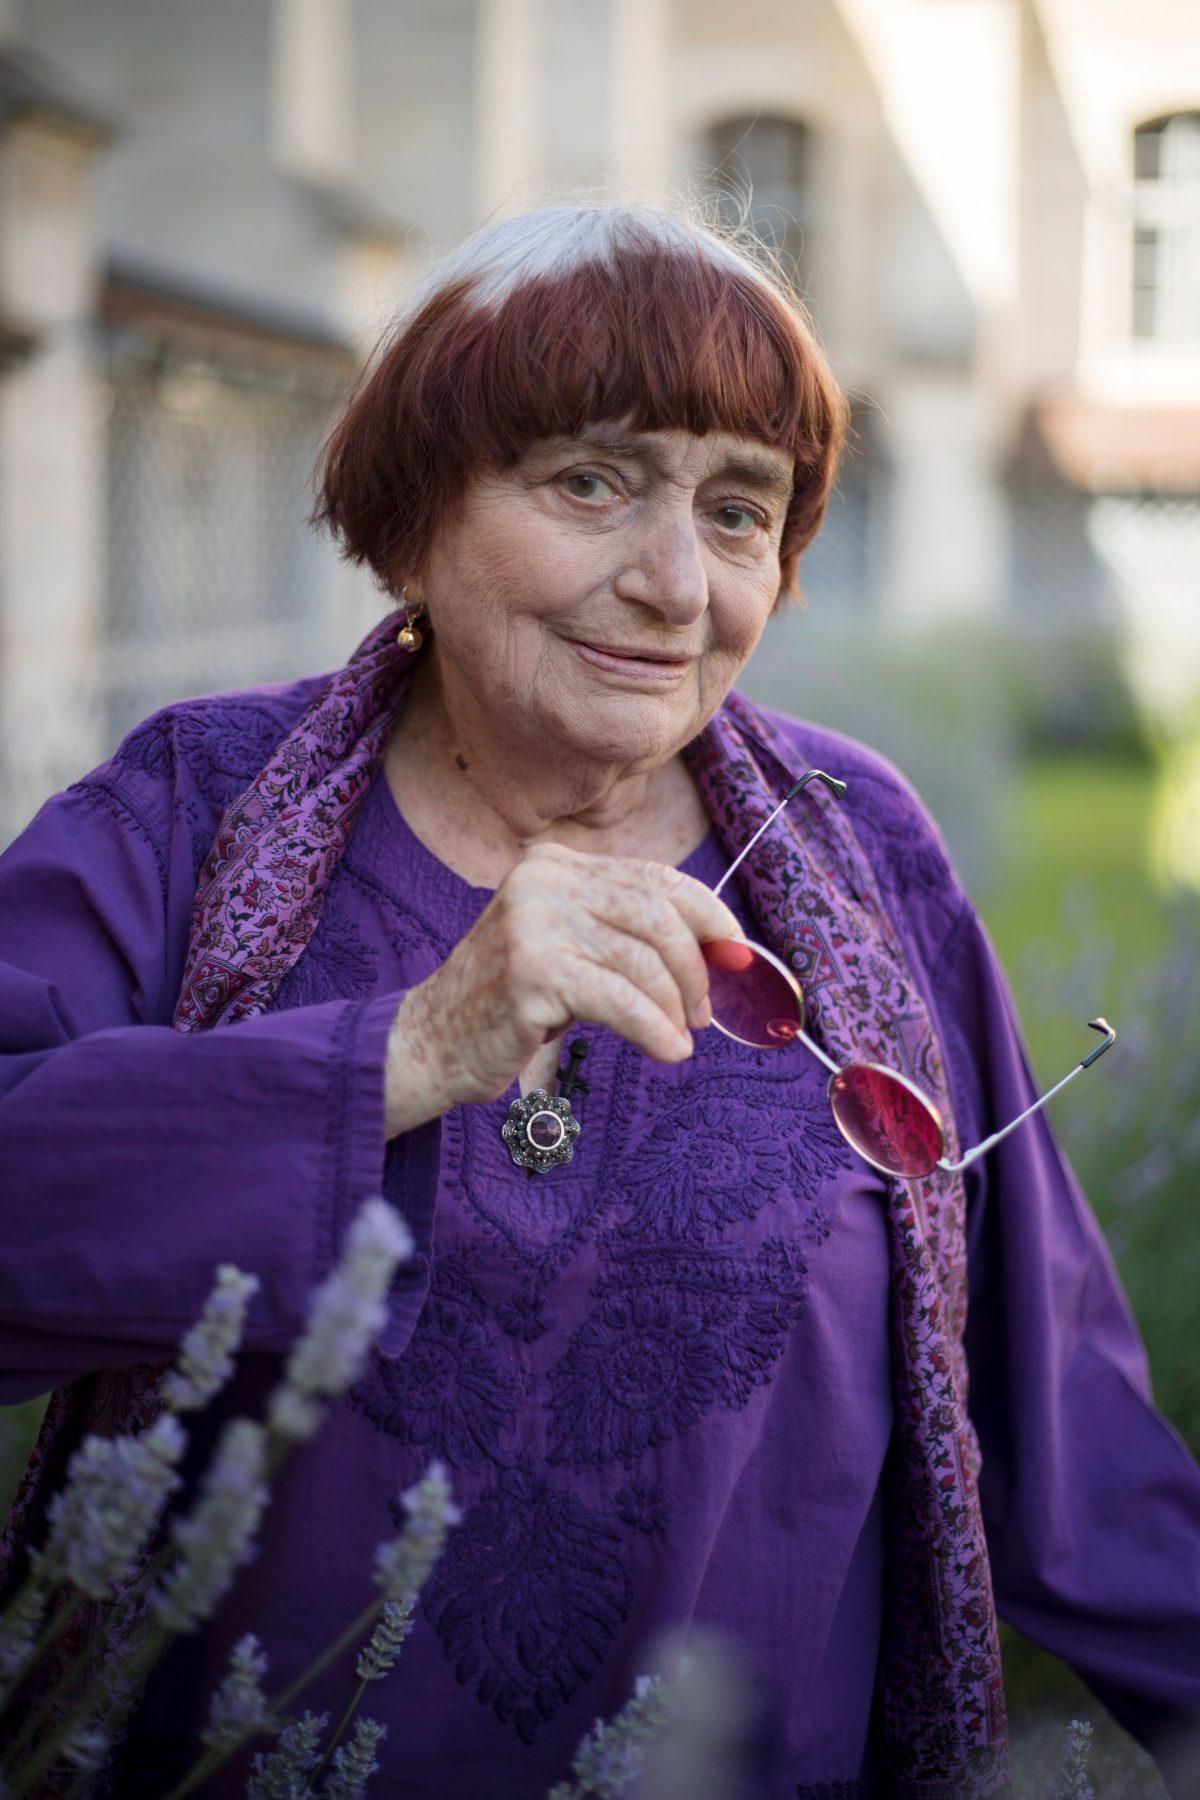 French film director Agnes Varda poses in Paris on July 3, 2018. (Thomas Samson/AFP/Getty Images)